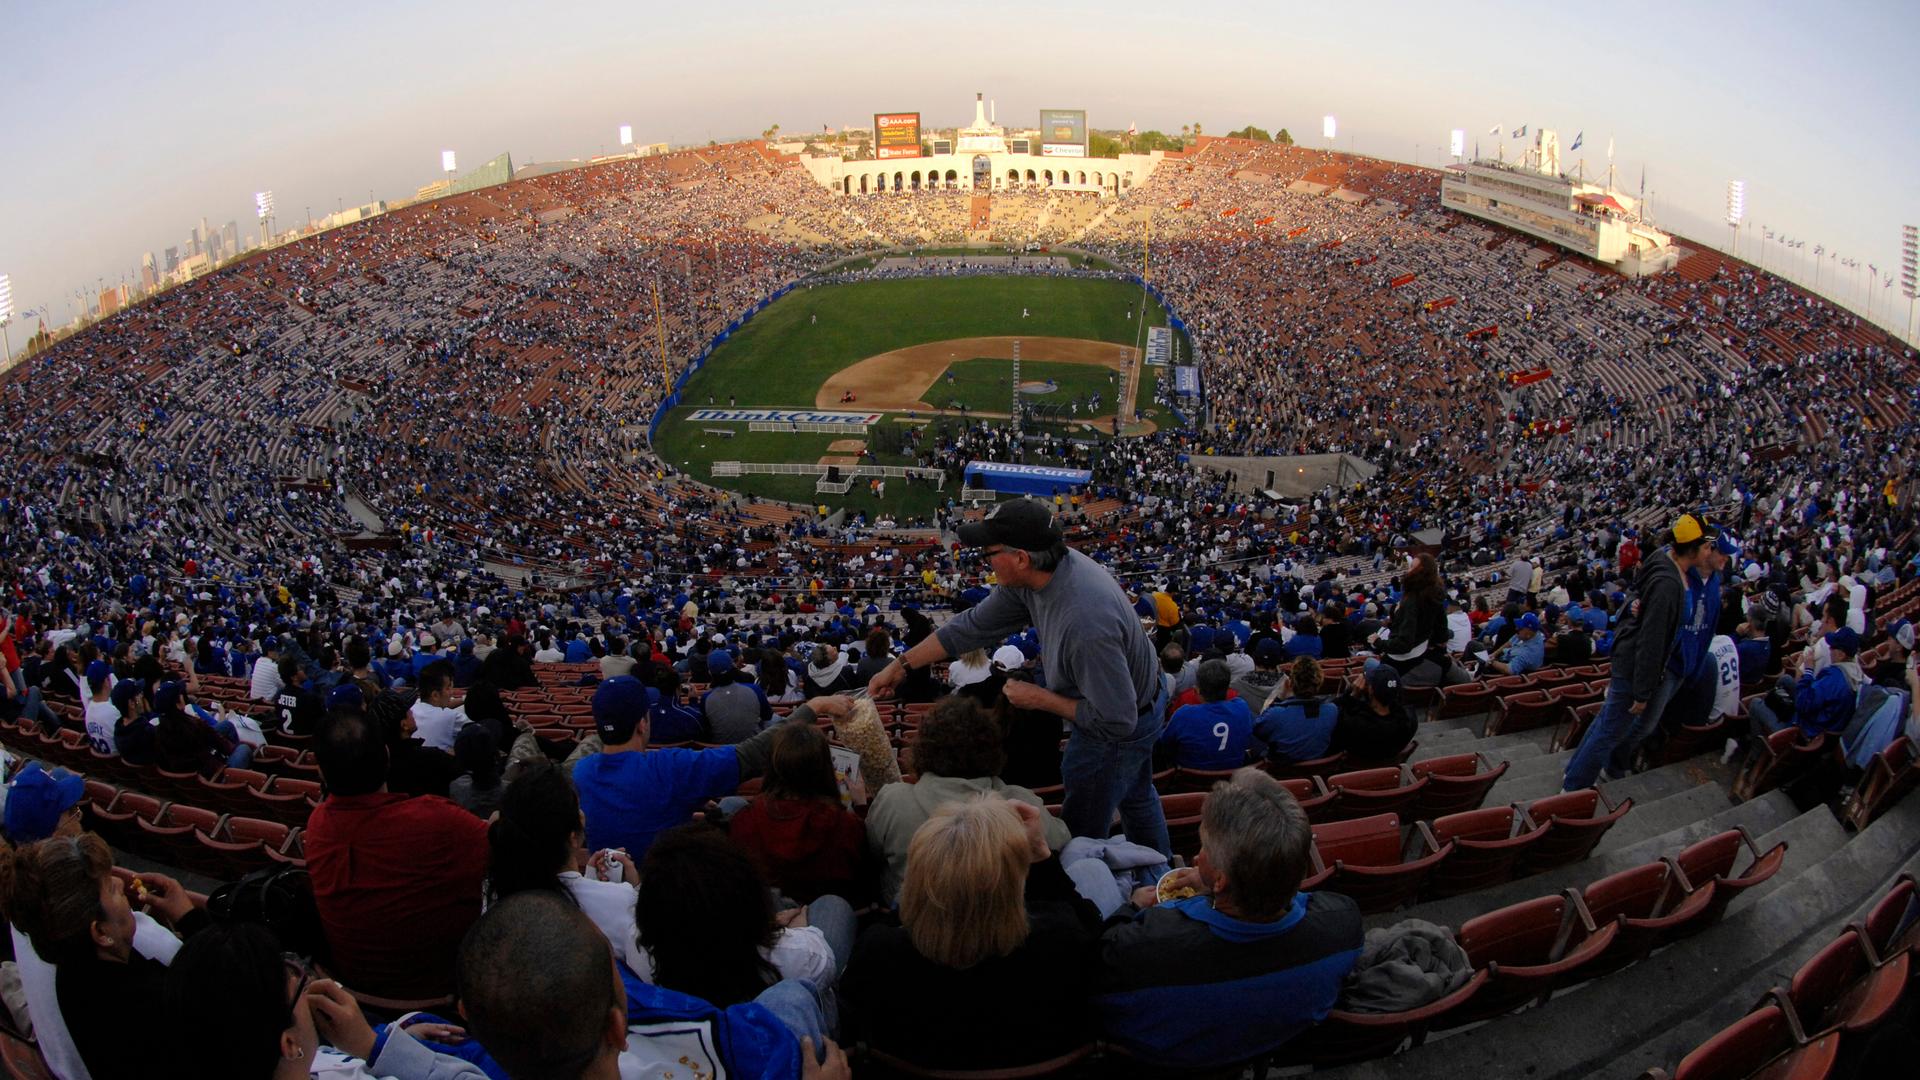 The existence of the LA Coliseum is one reason LA is attractive a a possible Olympics host